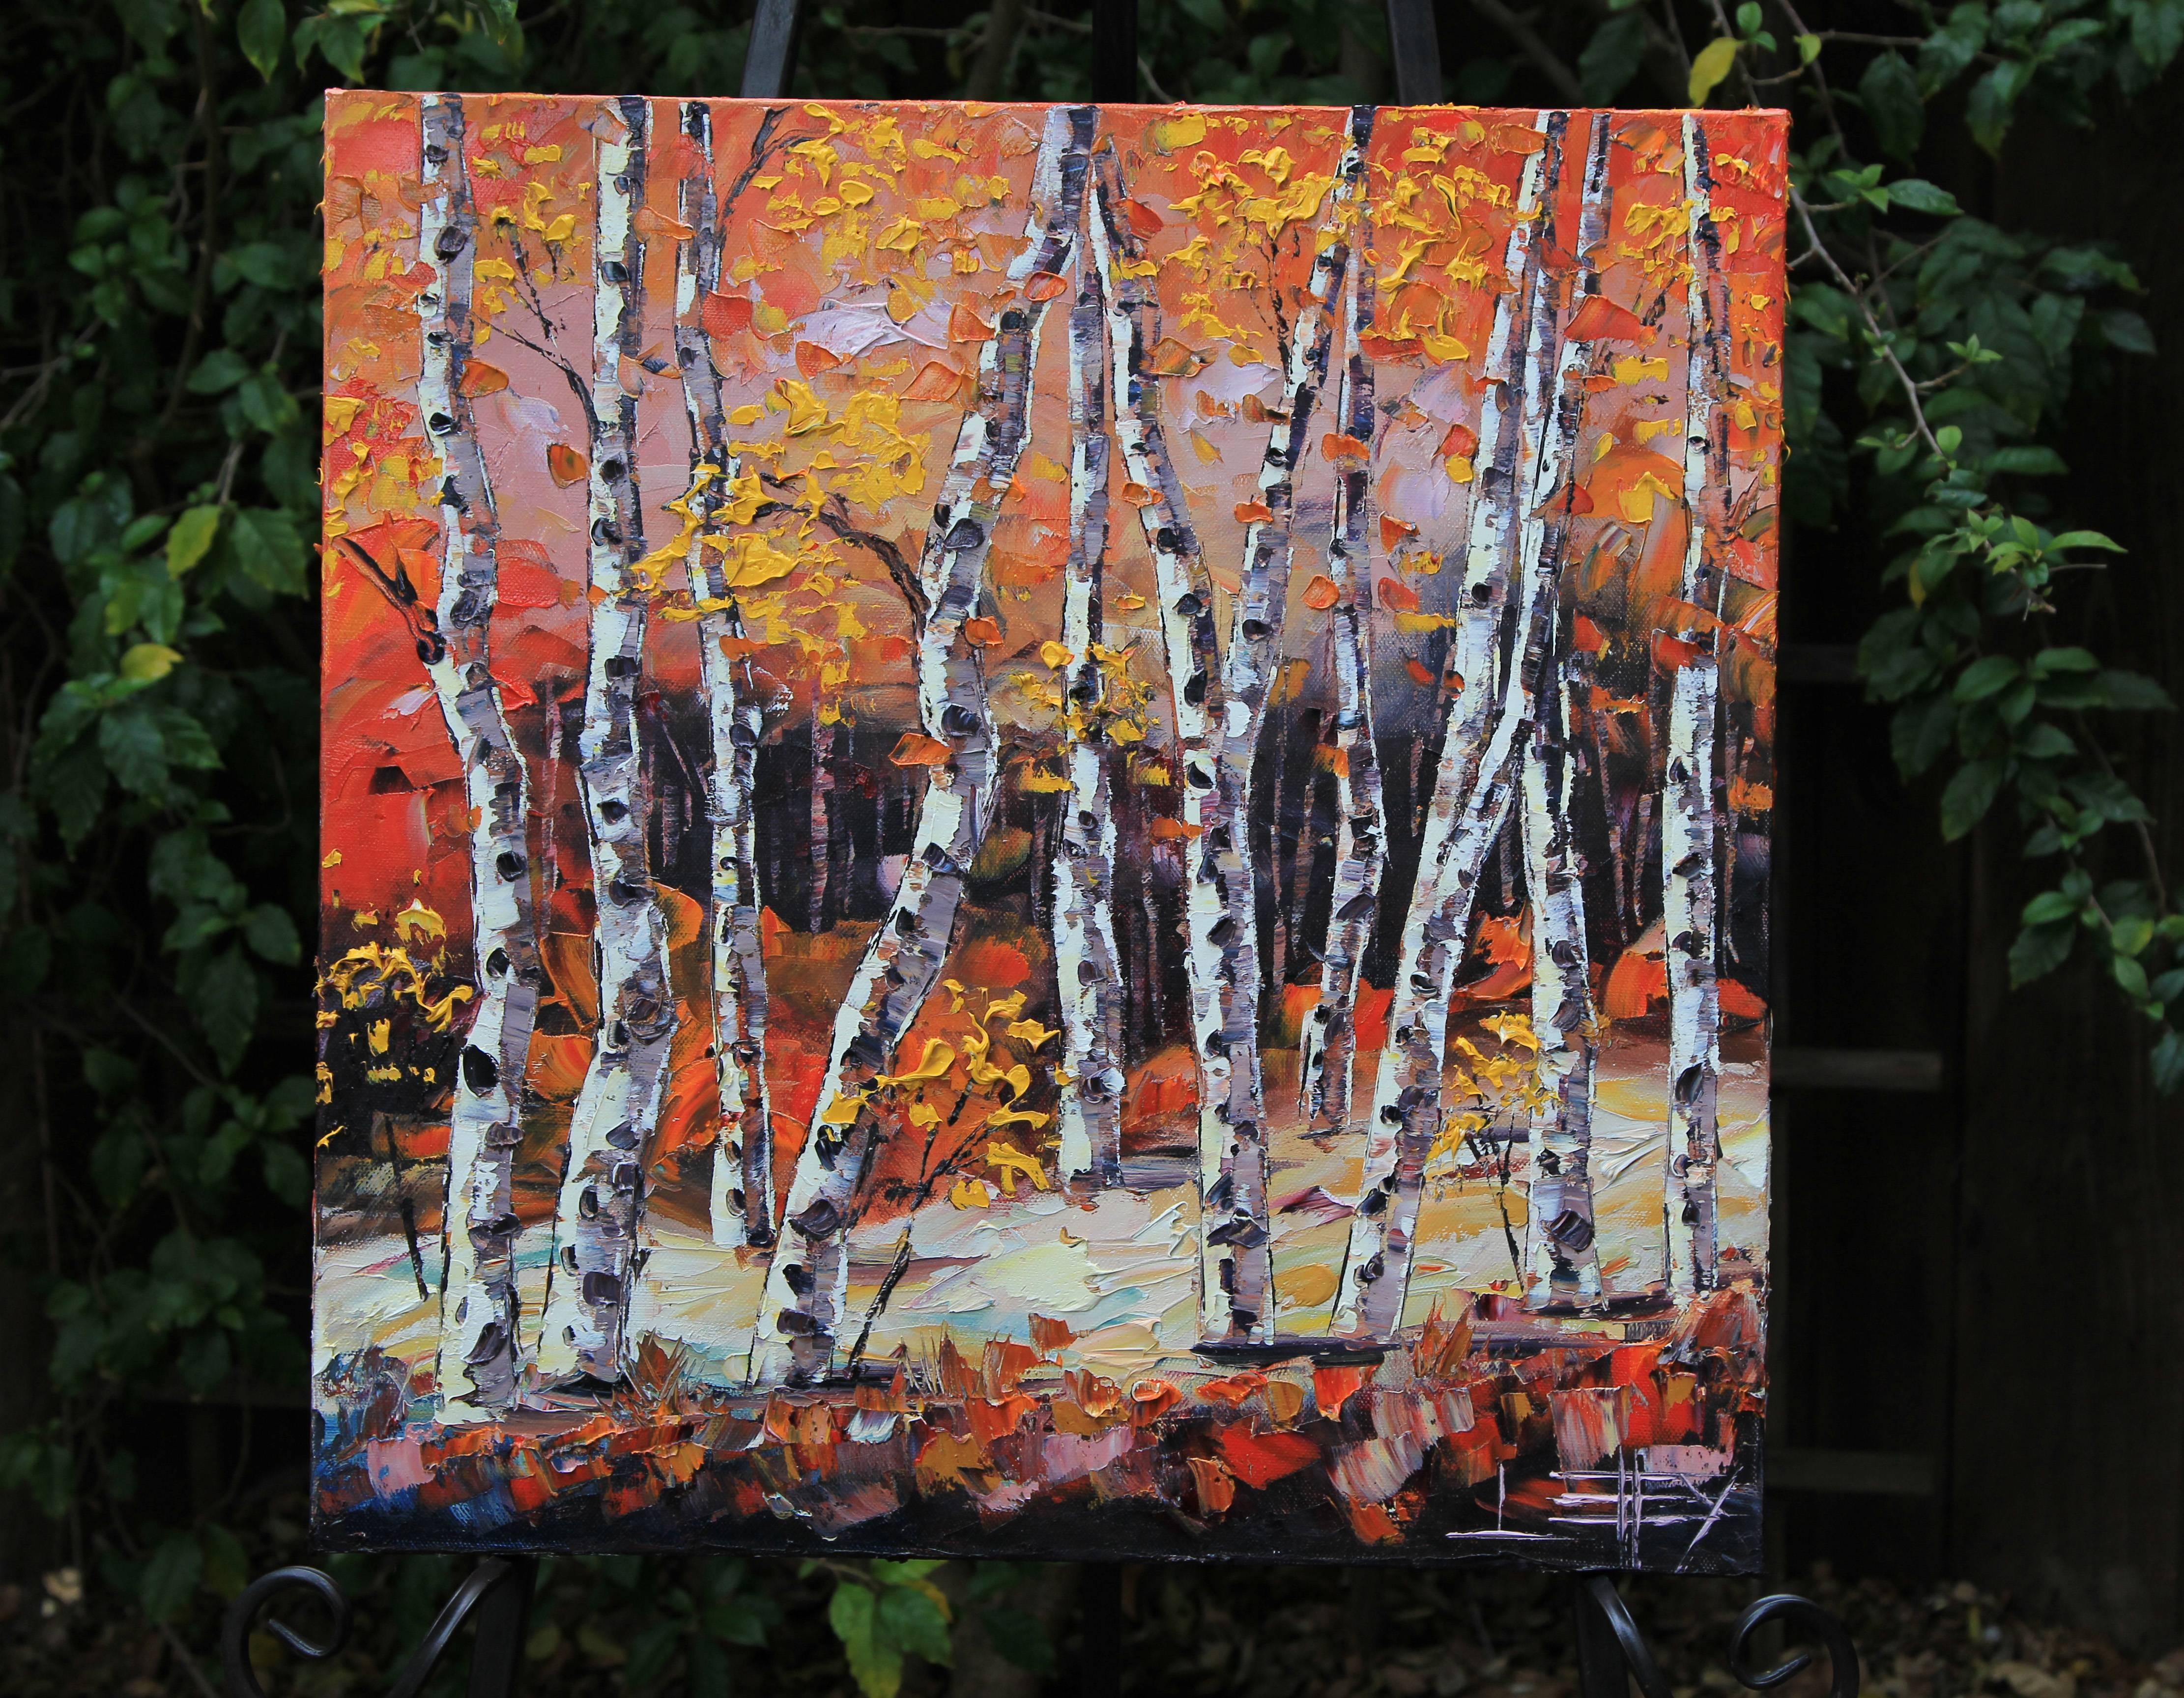 Benevolent Birch Lisa Elley Oil painting on stretched canvas
One-of-a-kind
Signed on front and back
2016
20 in. h x 20 in. w x .75 in. d
1 lbs. 0 oz. Artist Comments 
Whether it's fall, winter, spring or summer it's always time for some colorful